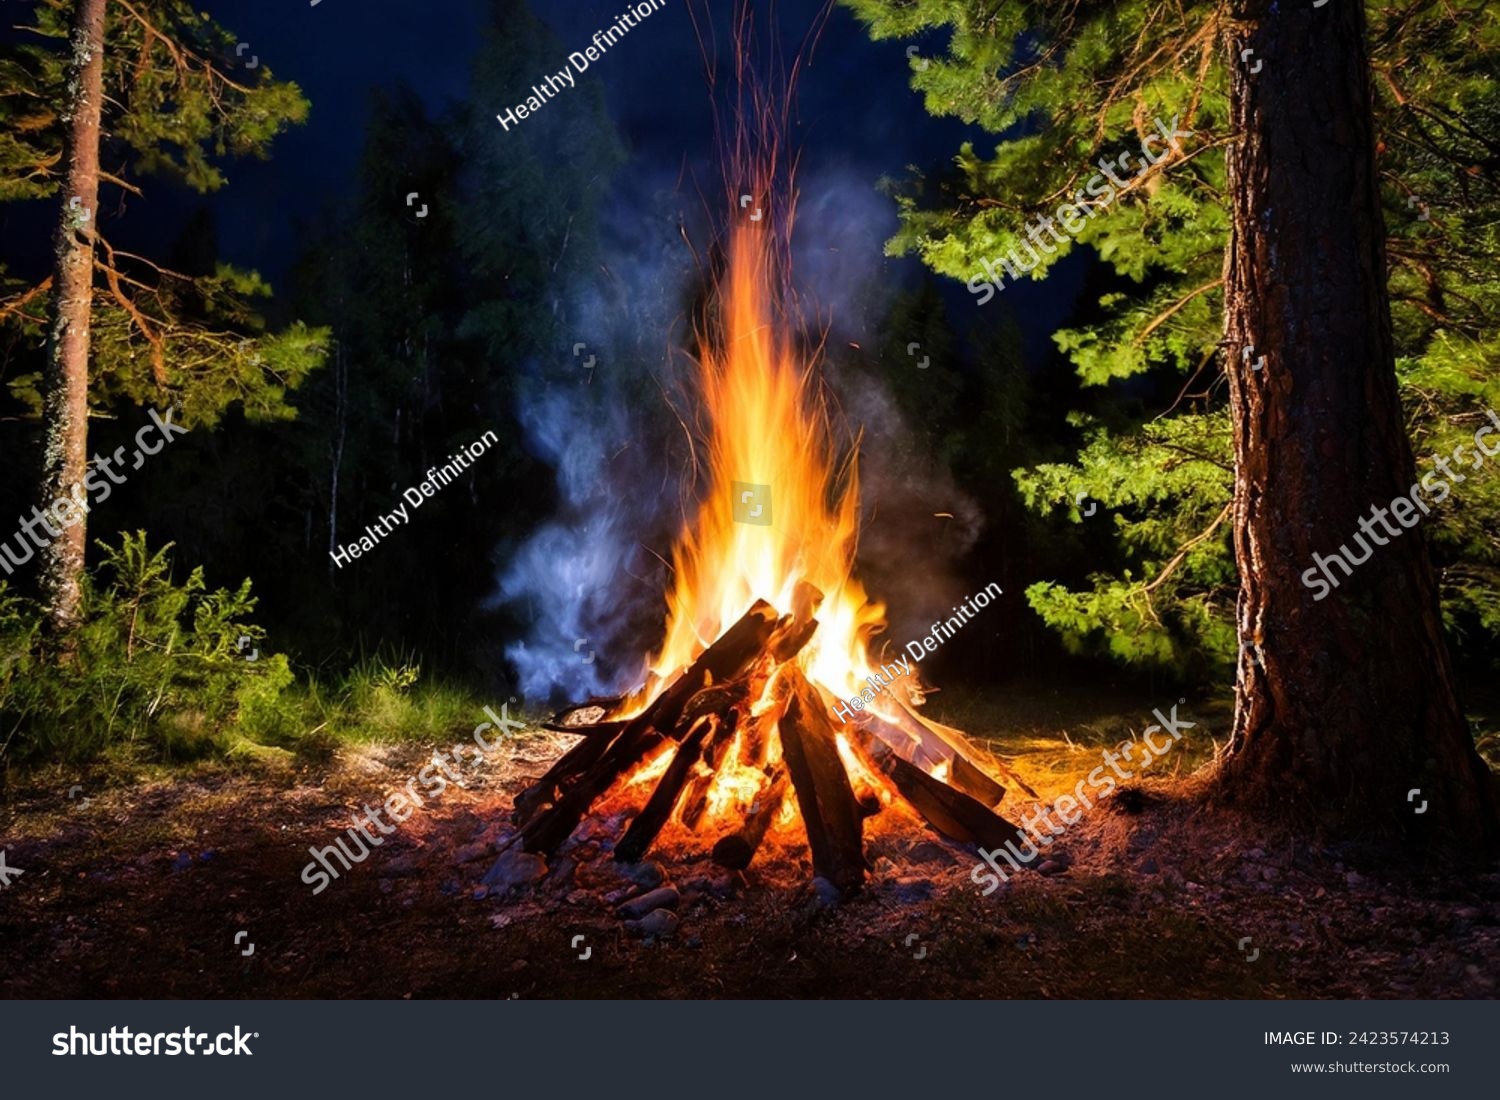 Burning campfire on a dark night in a forest. The bonfire burns in the forest. camp fire in the autumn during vacation in the mountains. Beautiful landscape of nature and trees. Sparks and flames.
 #2423574213